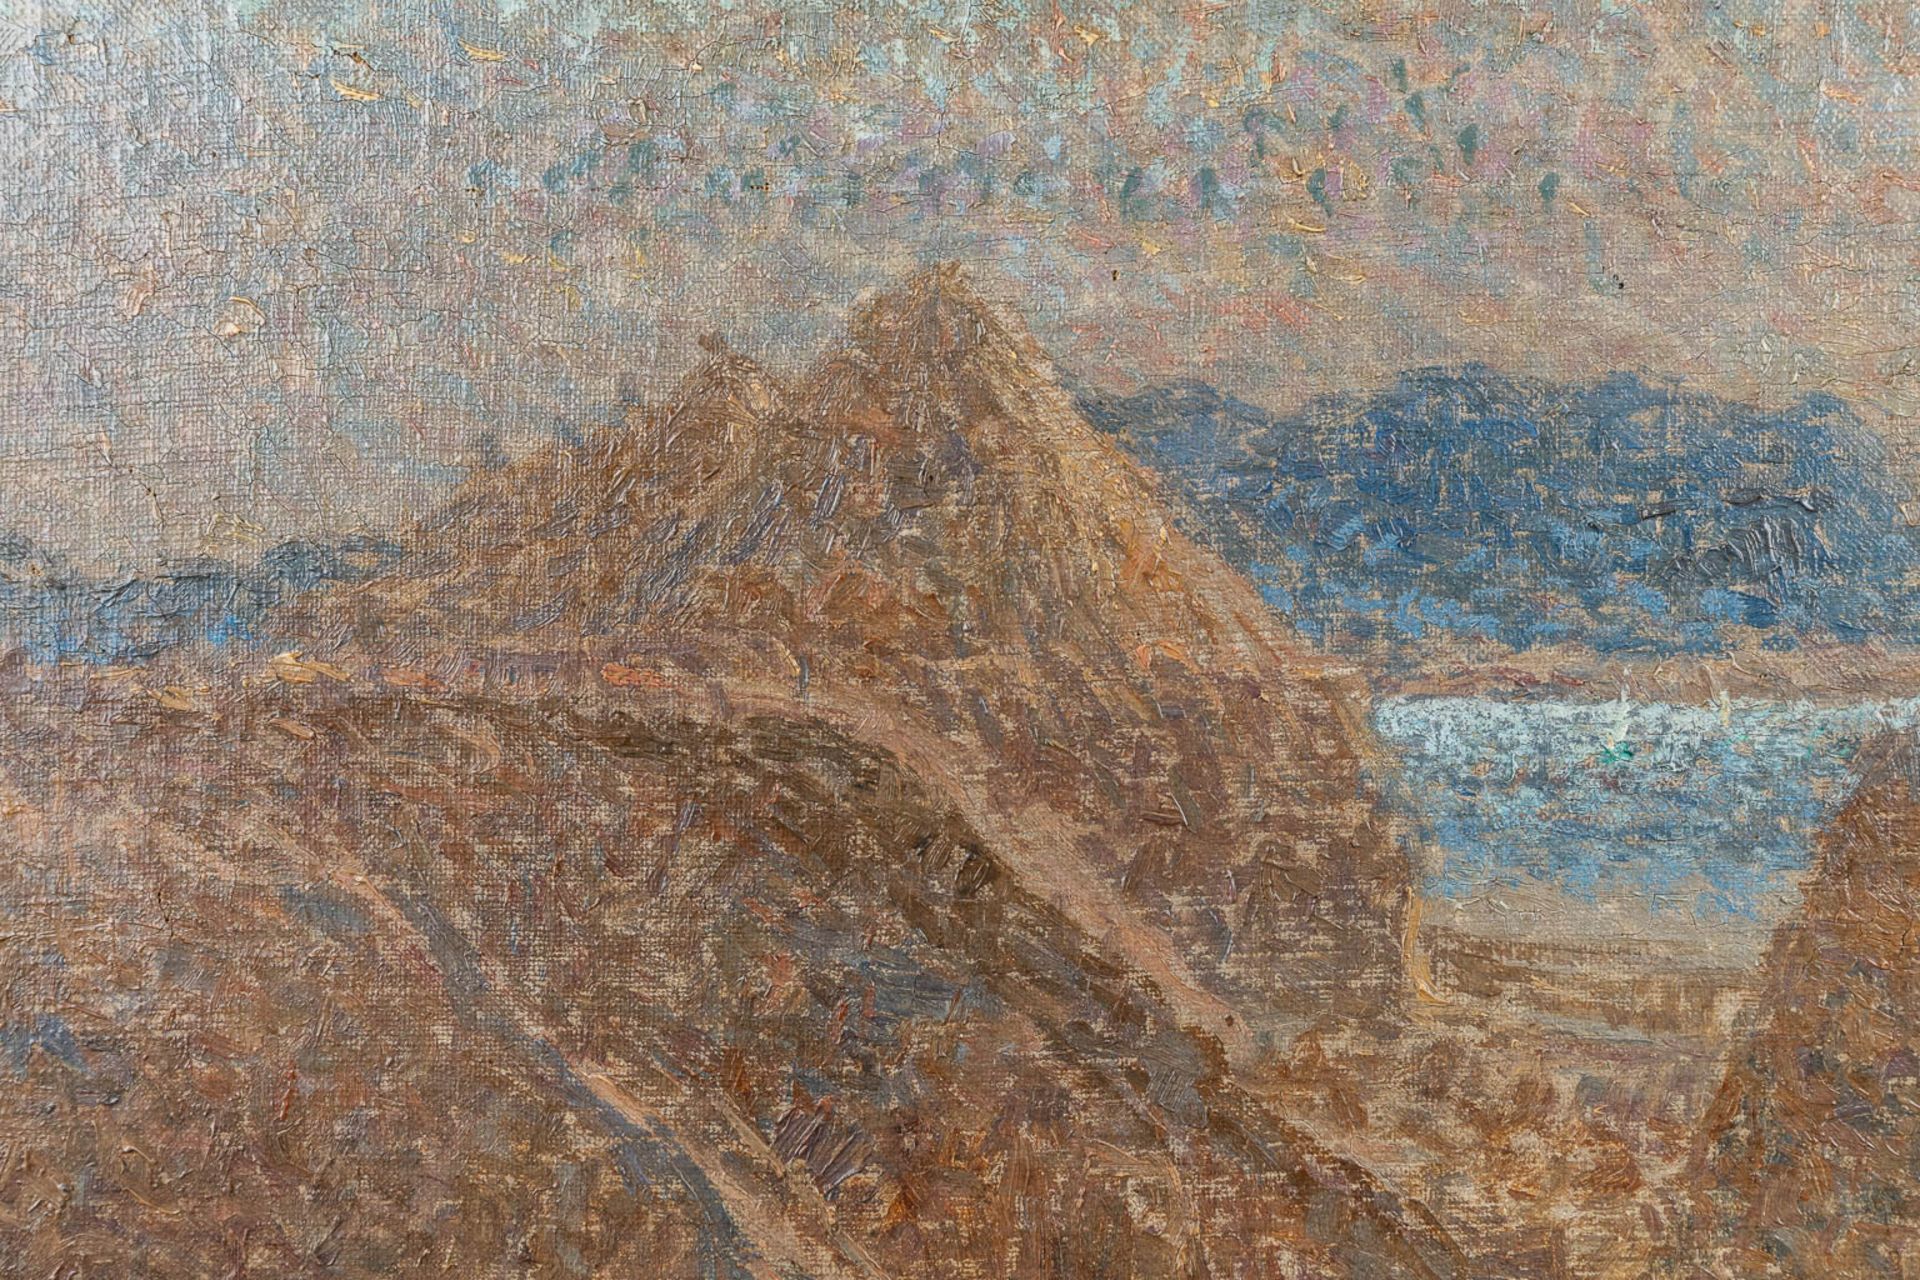 Modest HUYS (1874/75-1932) 'View of the Leie with haystacks' oil on canvas. (43 x 30cm) - Bild 8 aus 10